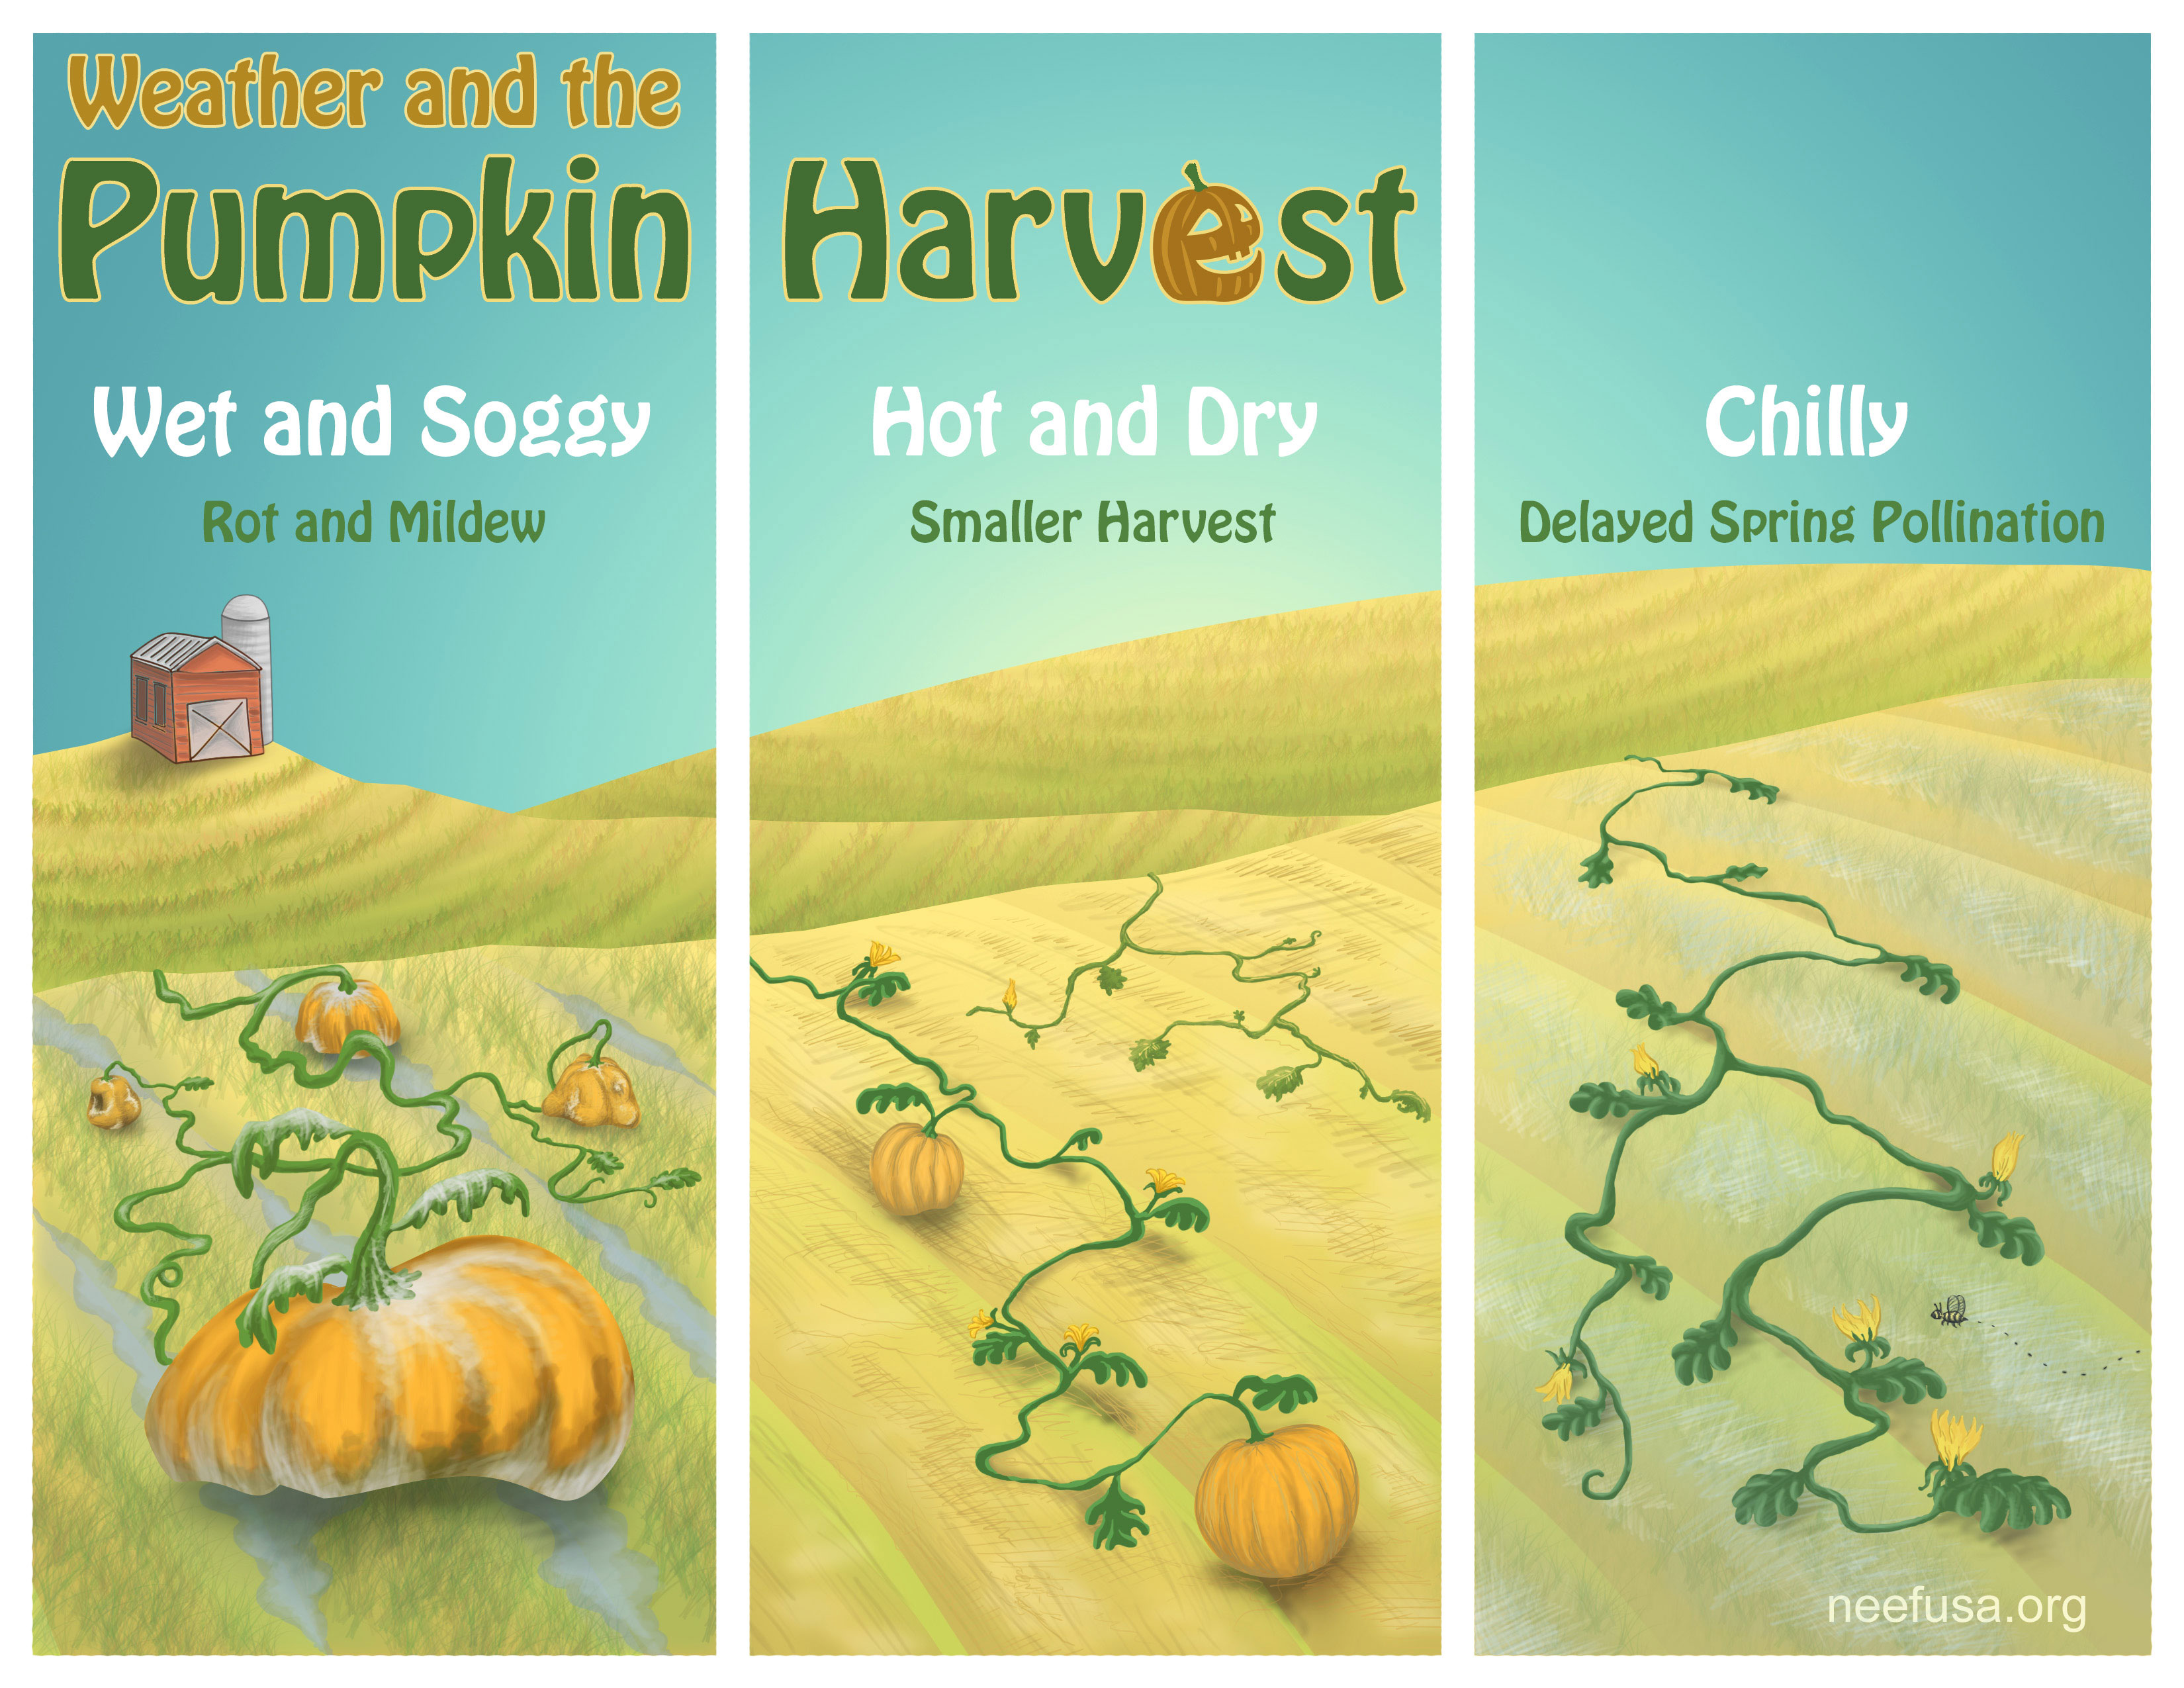 Weather and the Pumpkin Harvest